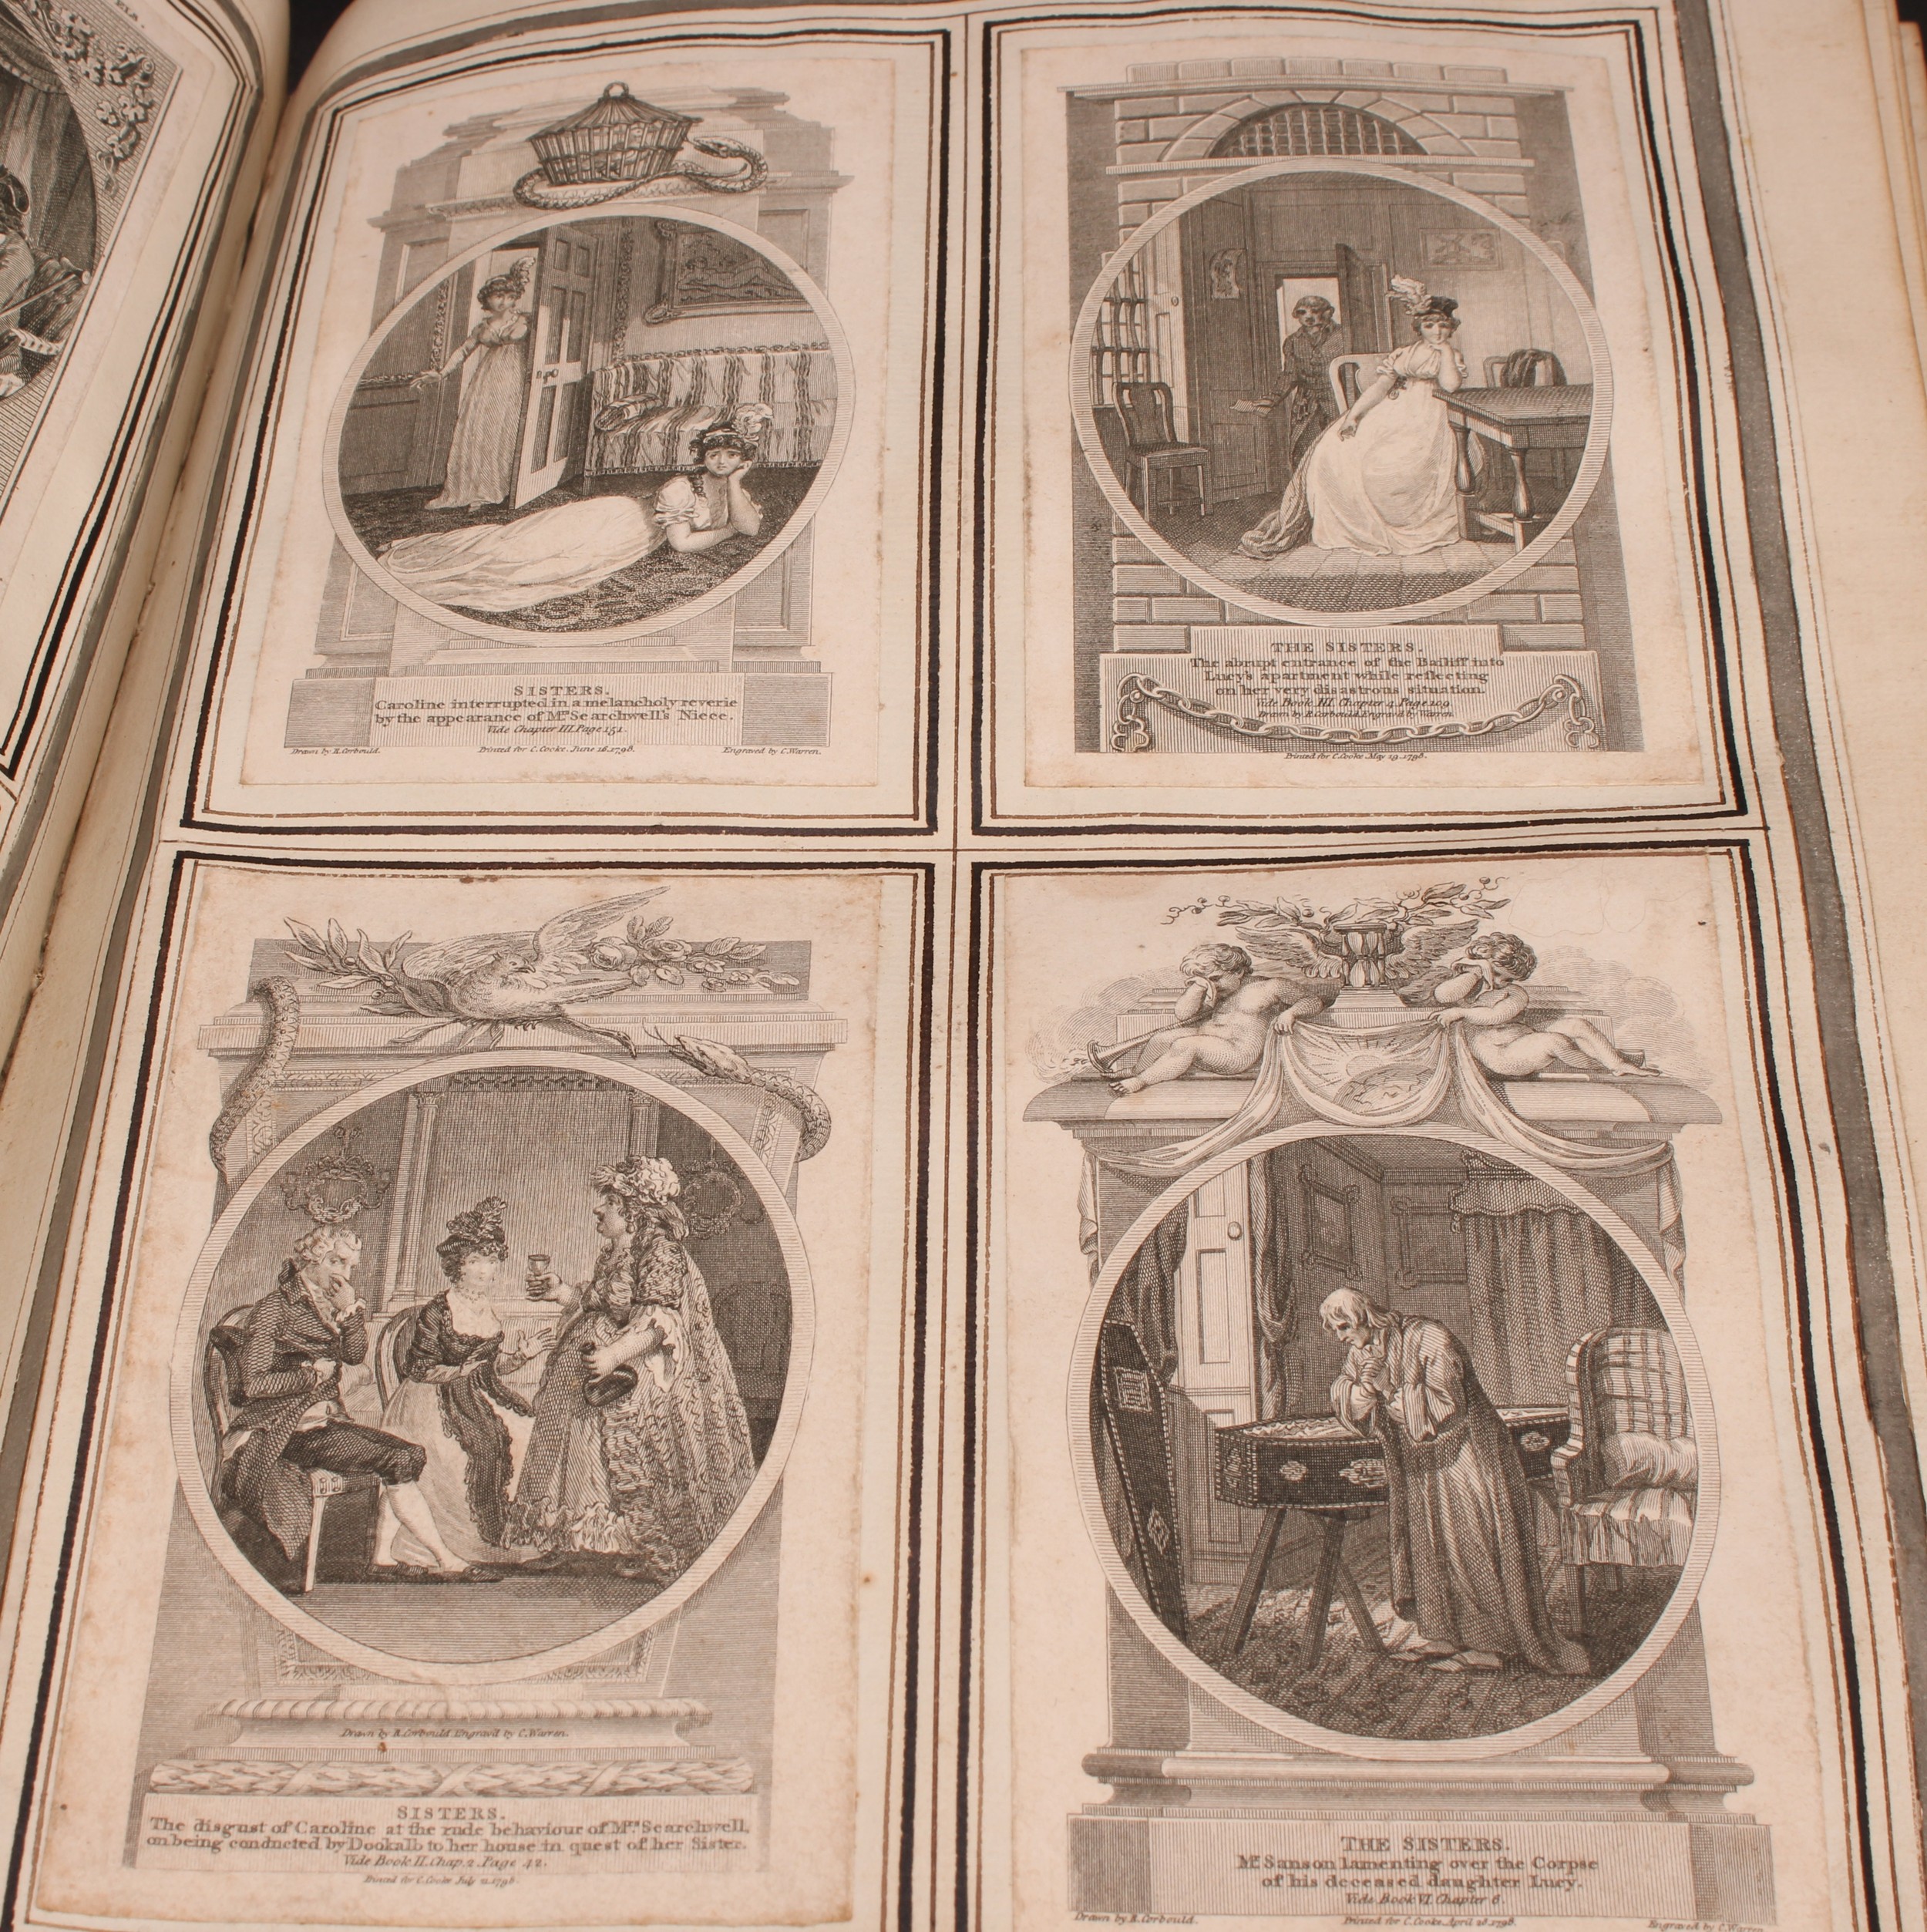 An album of 19th century engravings, hand-scrivened frontispiece inscribed 'A Collection of Prints - Image 4 of 6